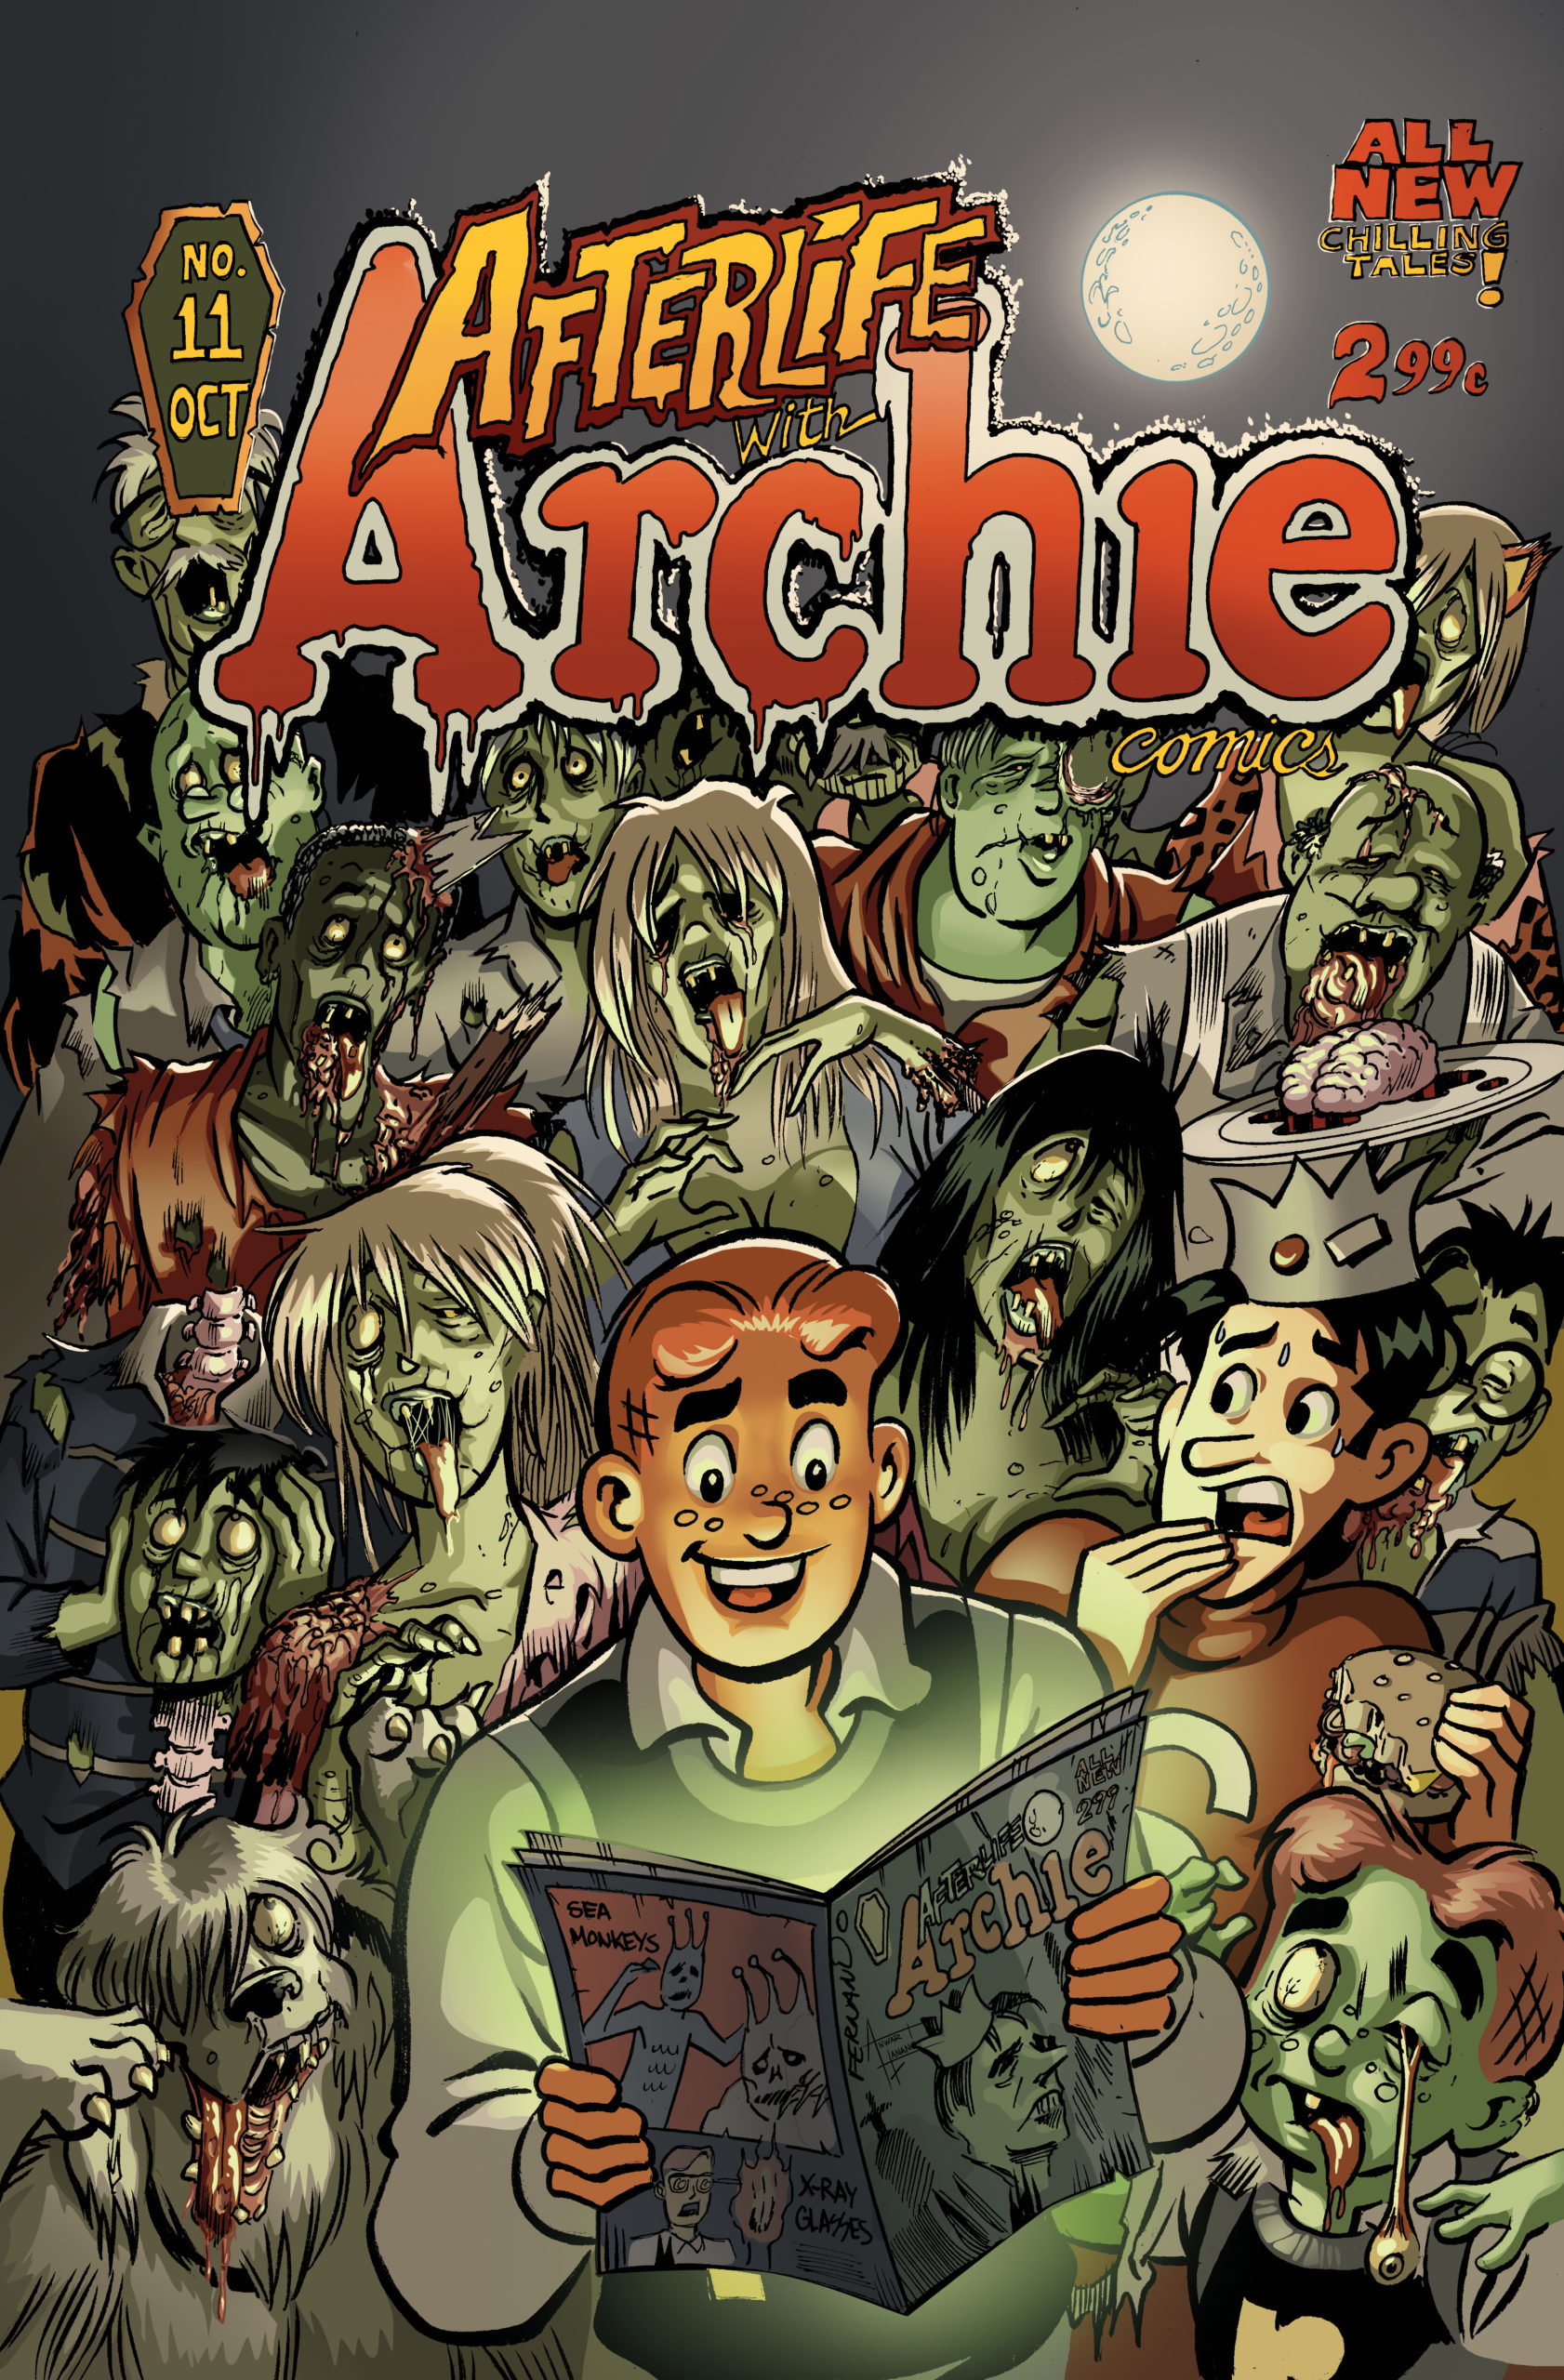 Afterlife of archie